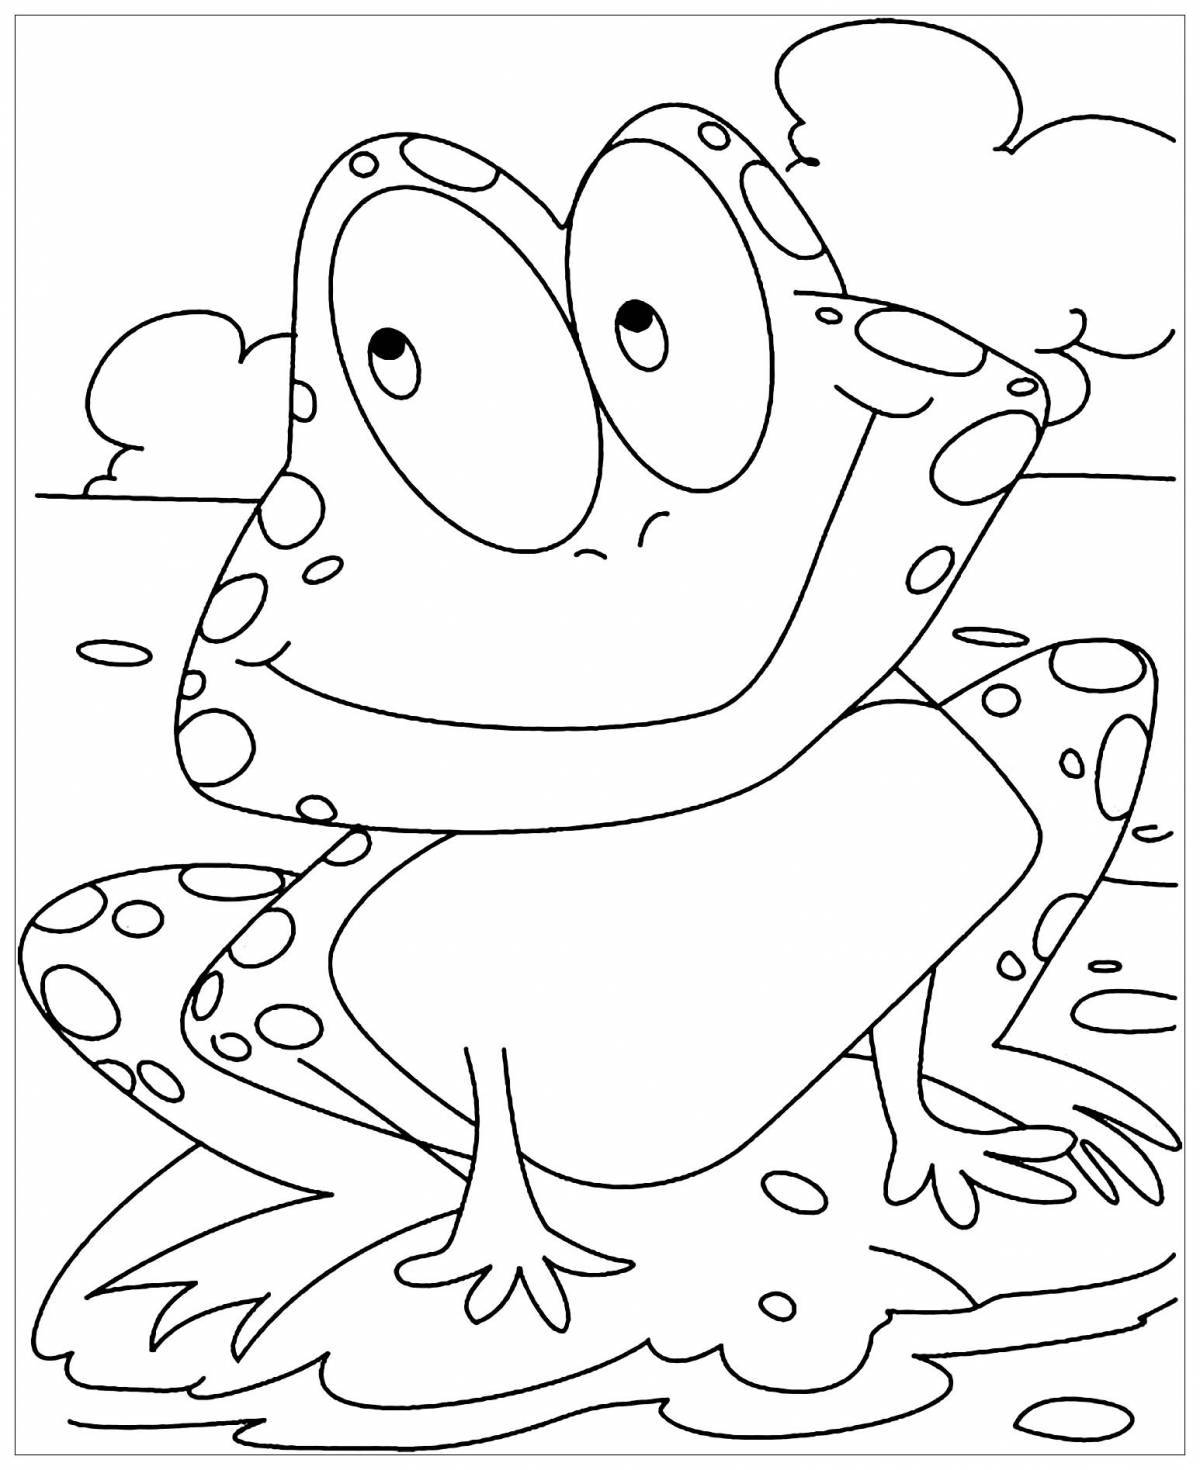 Playful coloring frog